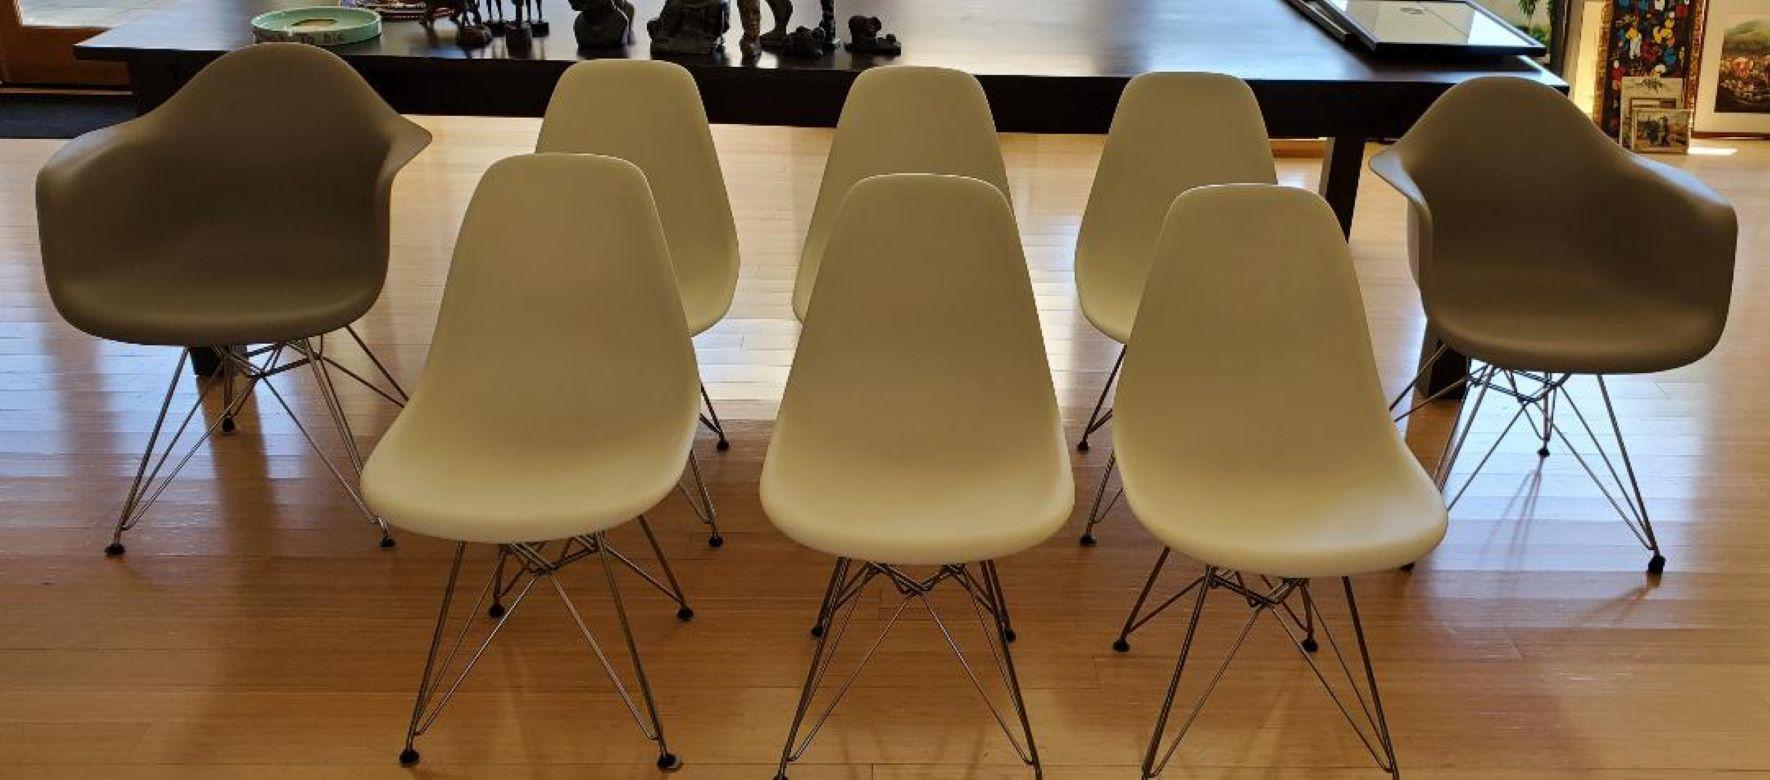 8 Eames Chairs Eiffel Tower 2 DAR Arm Chairs 6 DSR Side Chairs by Herman Miller 12